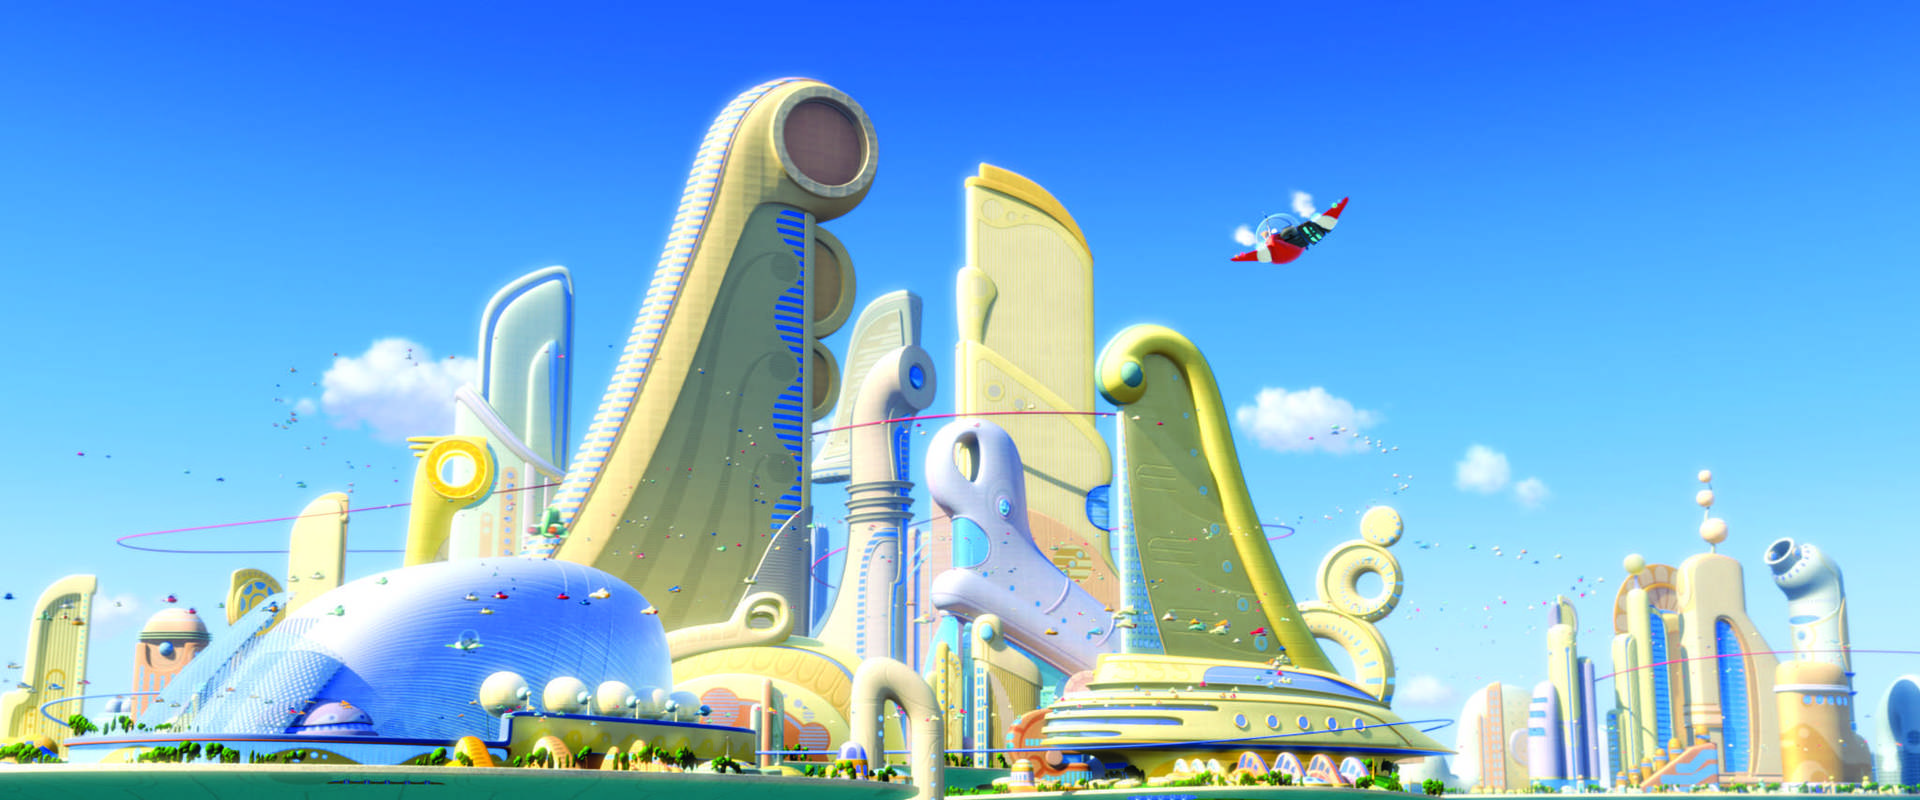 Meet the Robinsons background 2